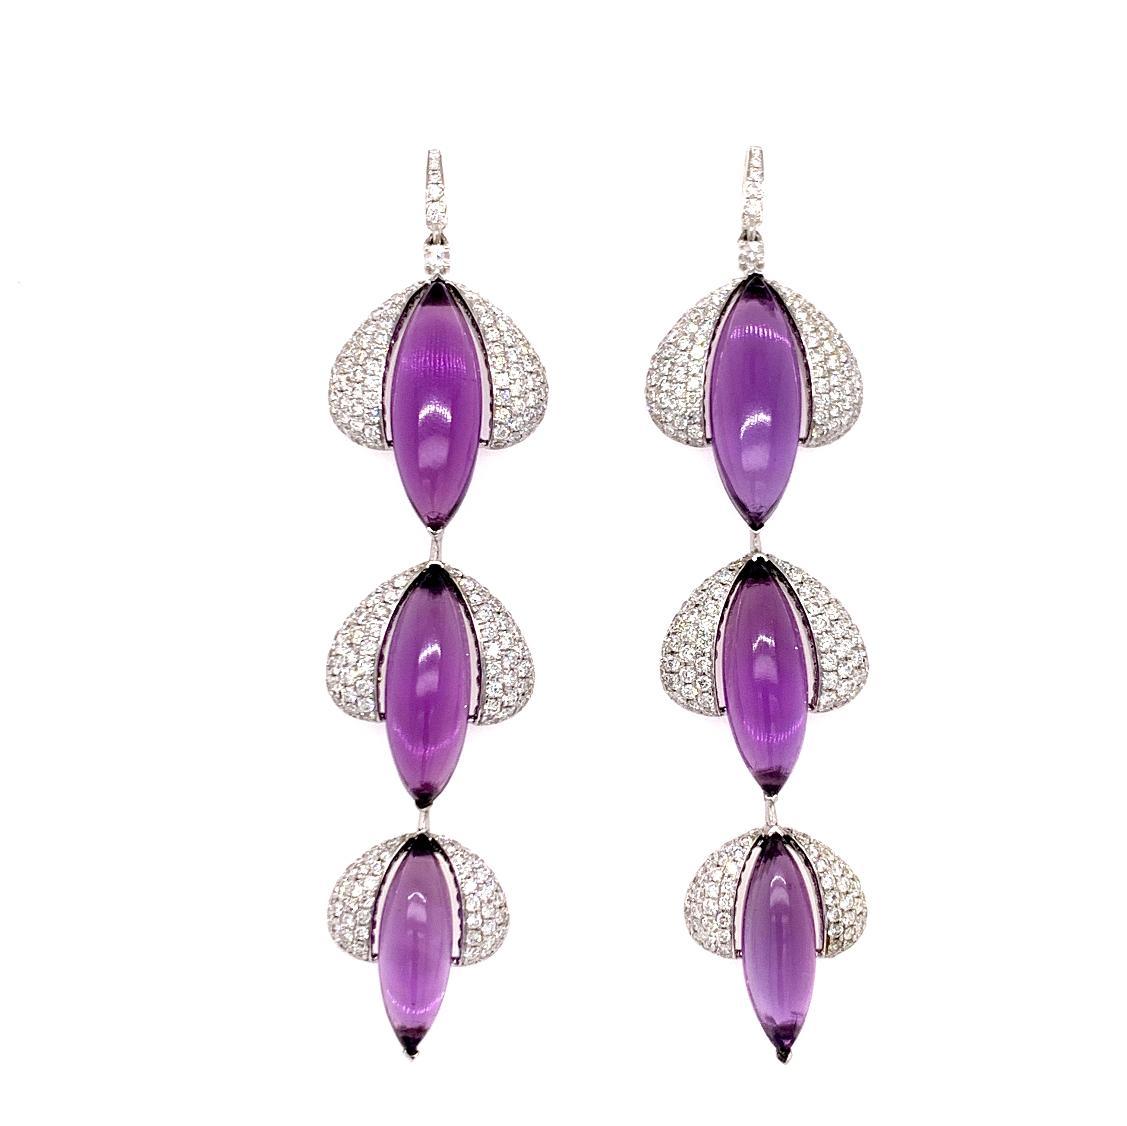 Long earrings with magnificent marquise amethyst cabochons that are surrounded by micro-pavé diamonds.

•	Total Diamond Weight: 4.22 carats 
•	Amethyst Weight: 18.85 carats
•	Diamond Quality/Colour: VS/FG (Clean, White)
